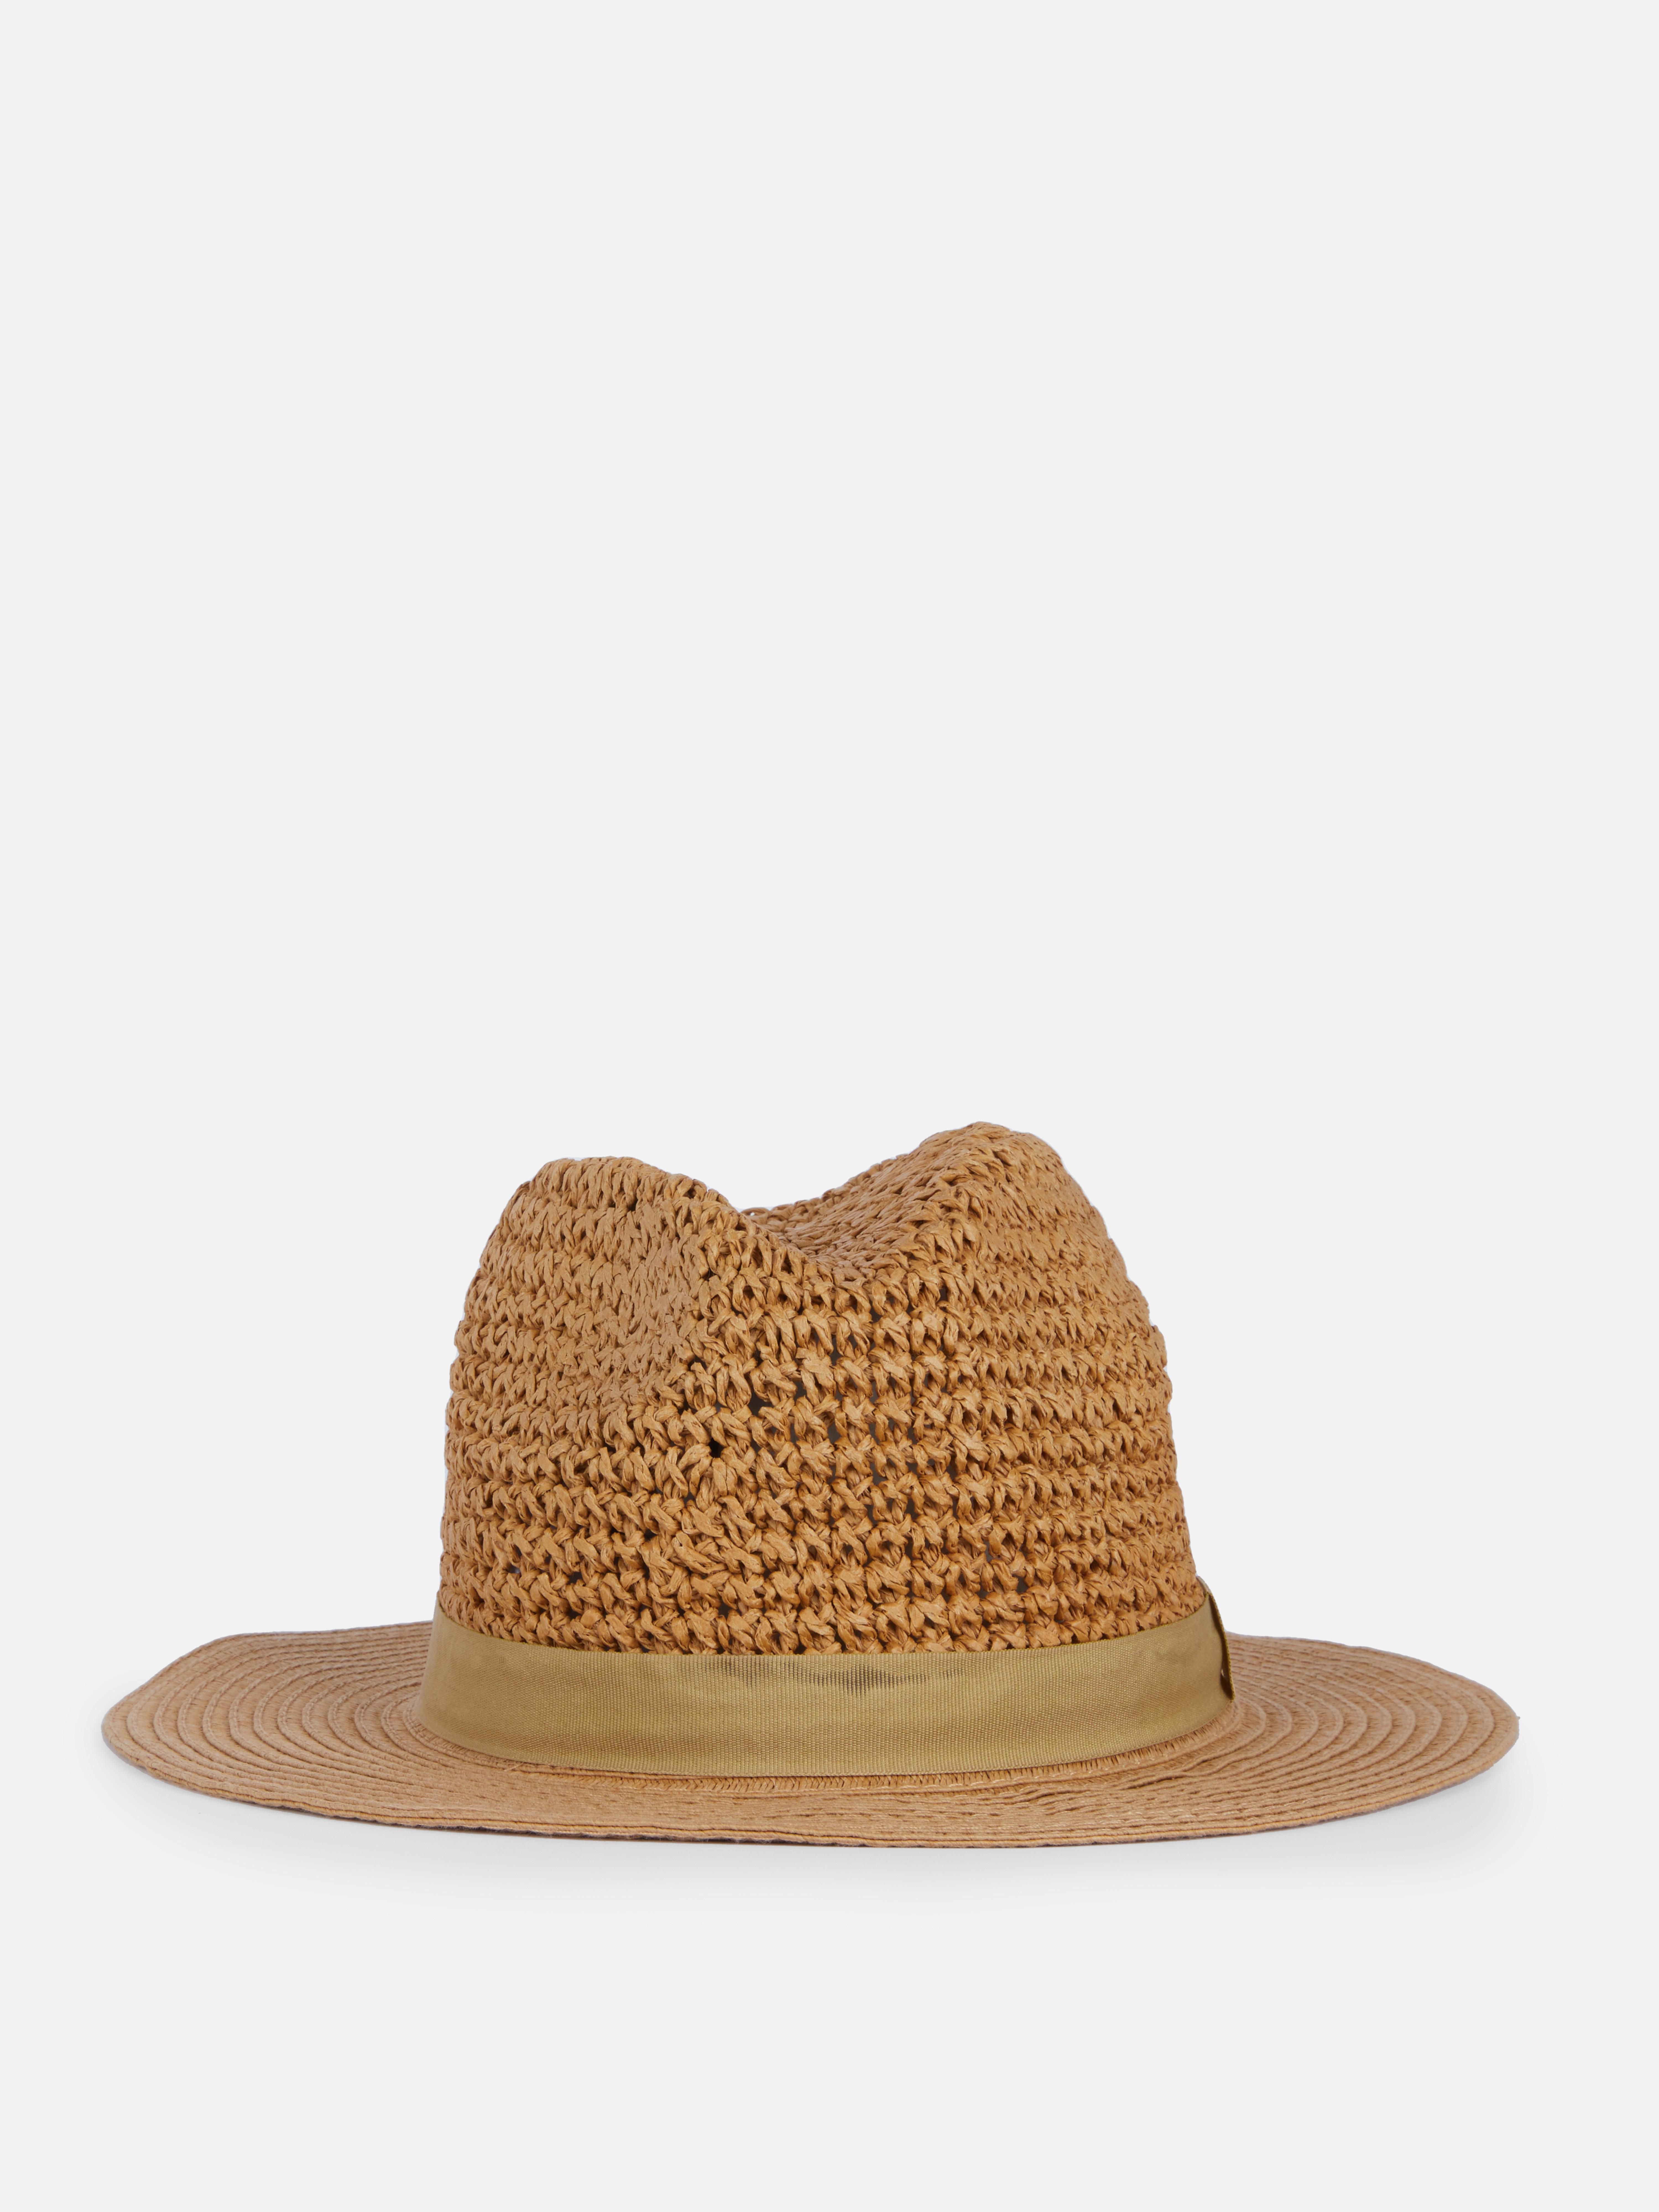 Woven Straw Trilby Hat